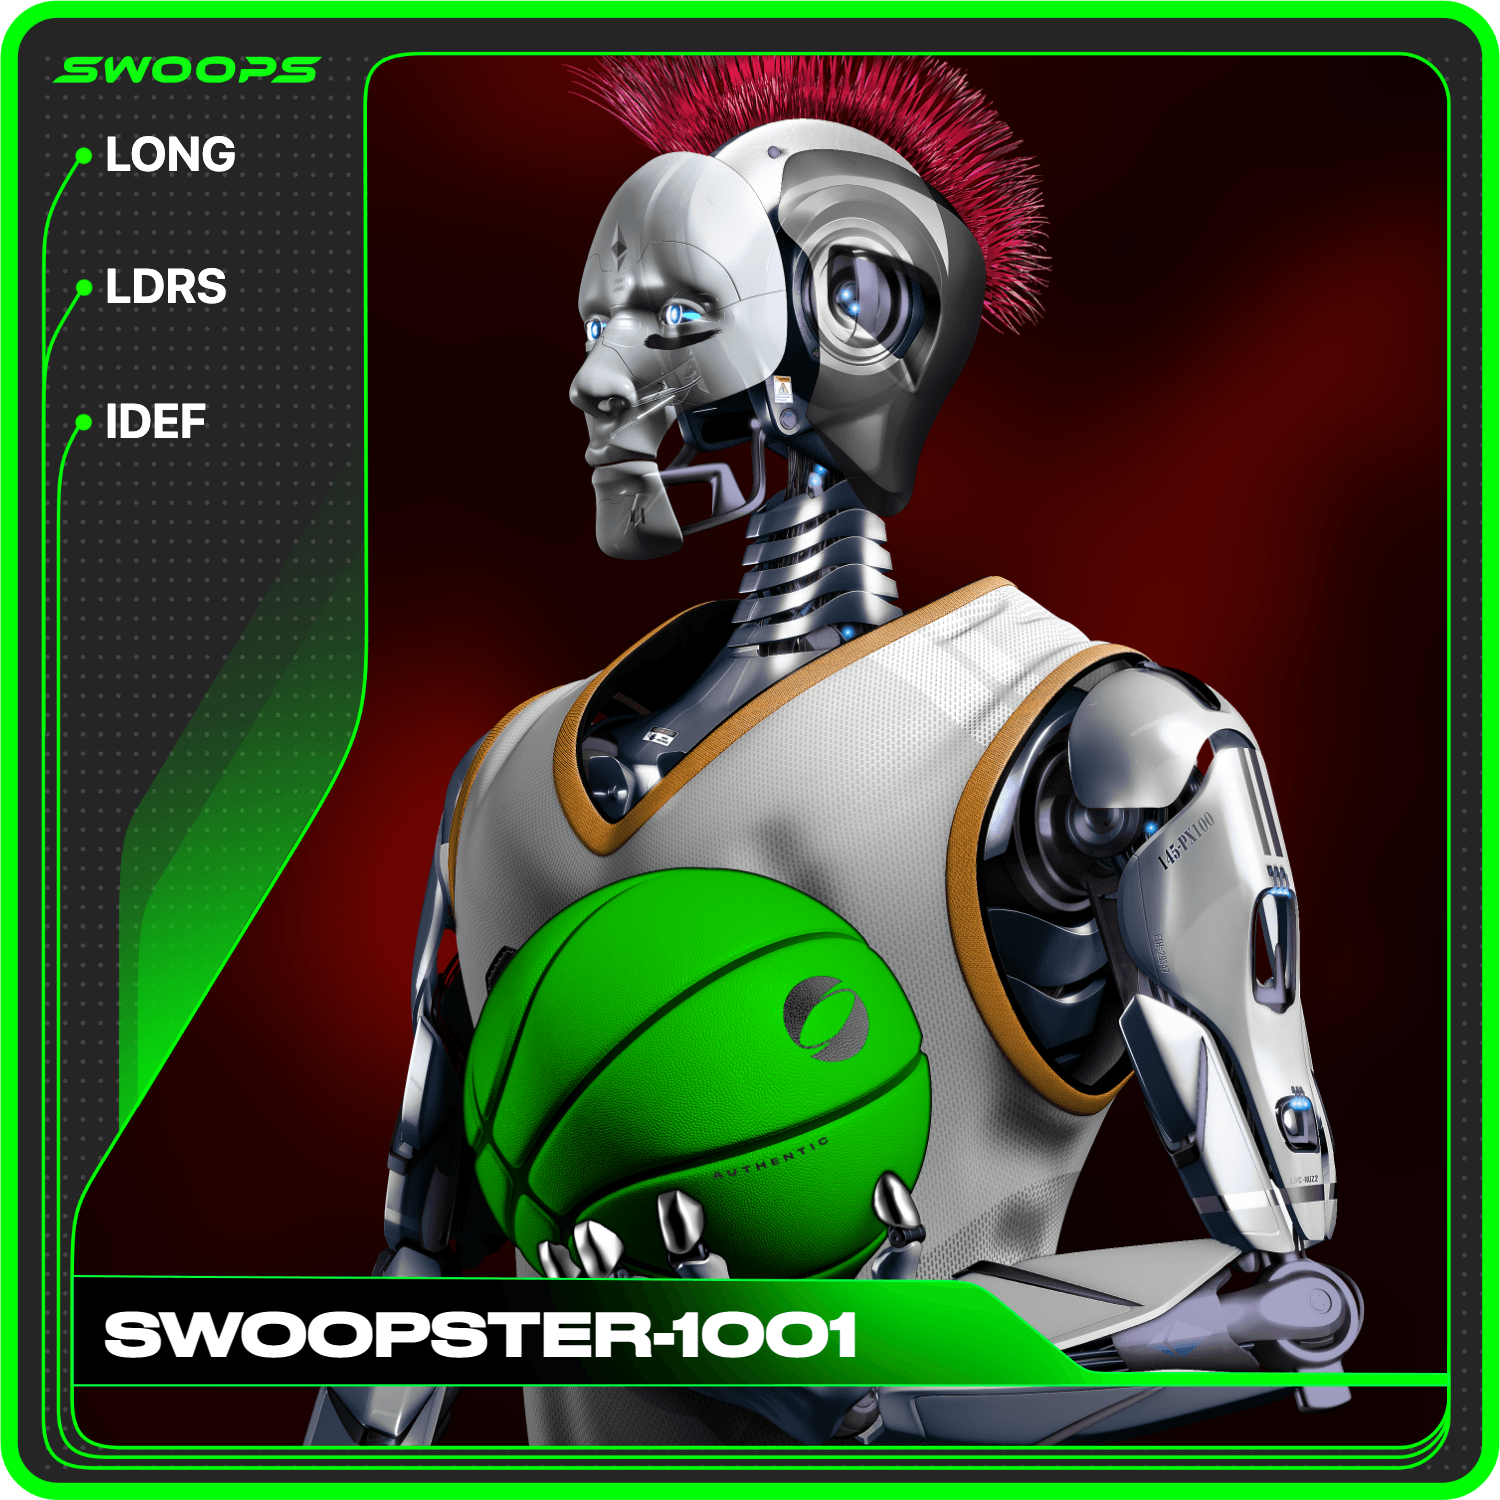 SWOOPSTER-1001